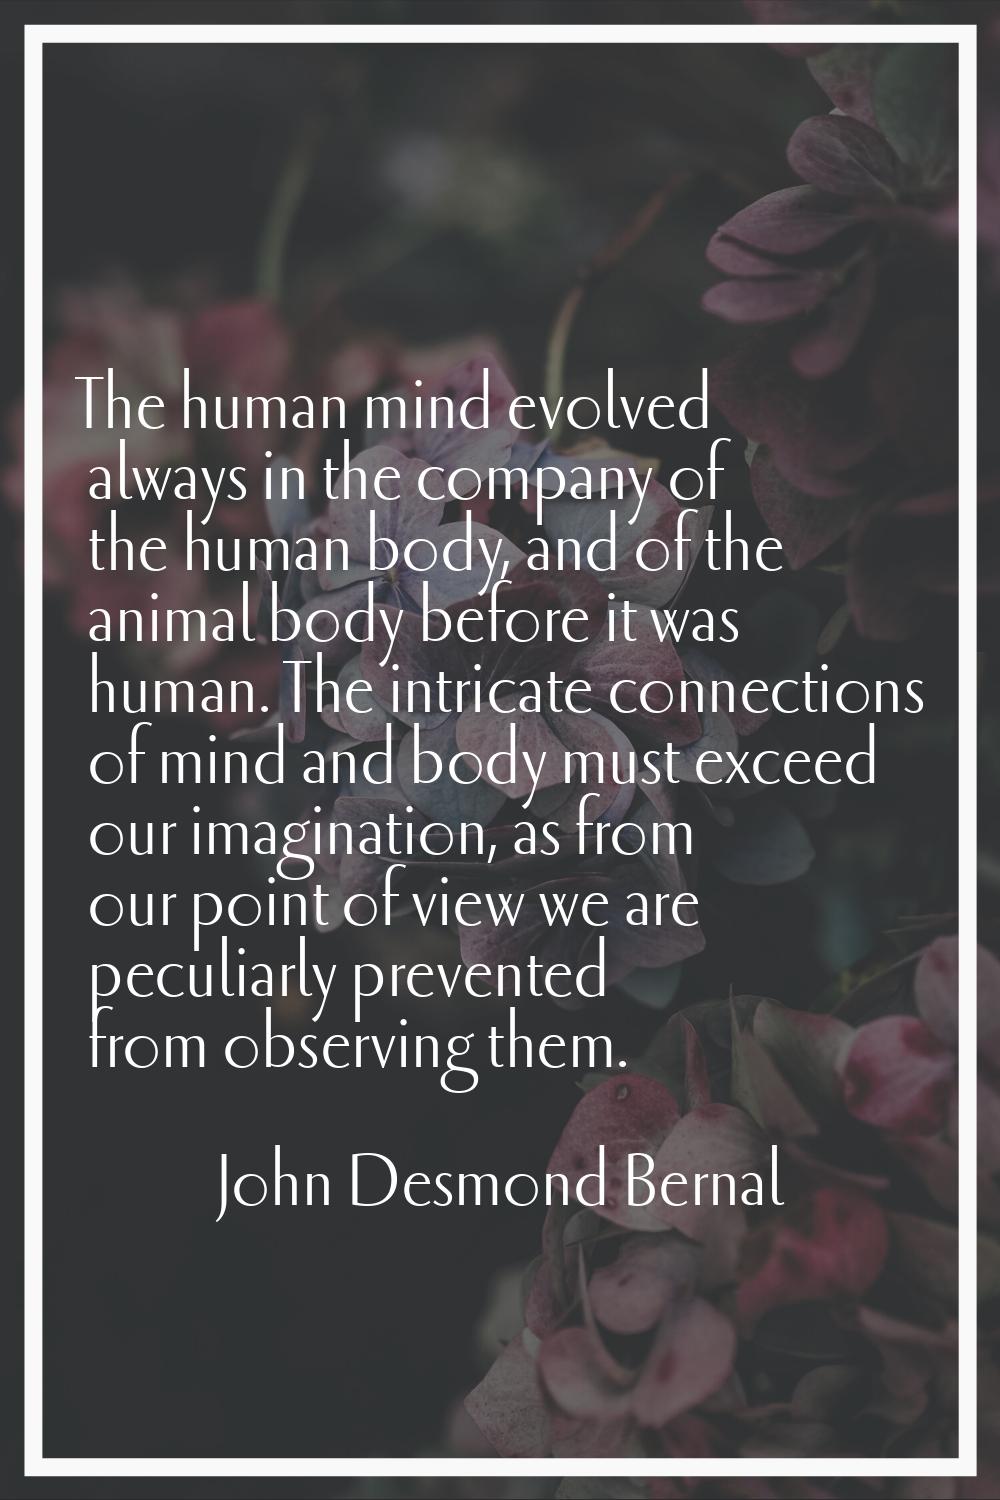 The human mind evolved always in the company of the human body, and of the animal body before it wa